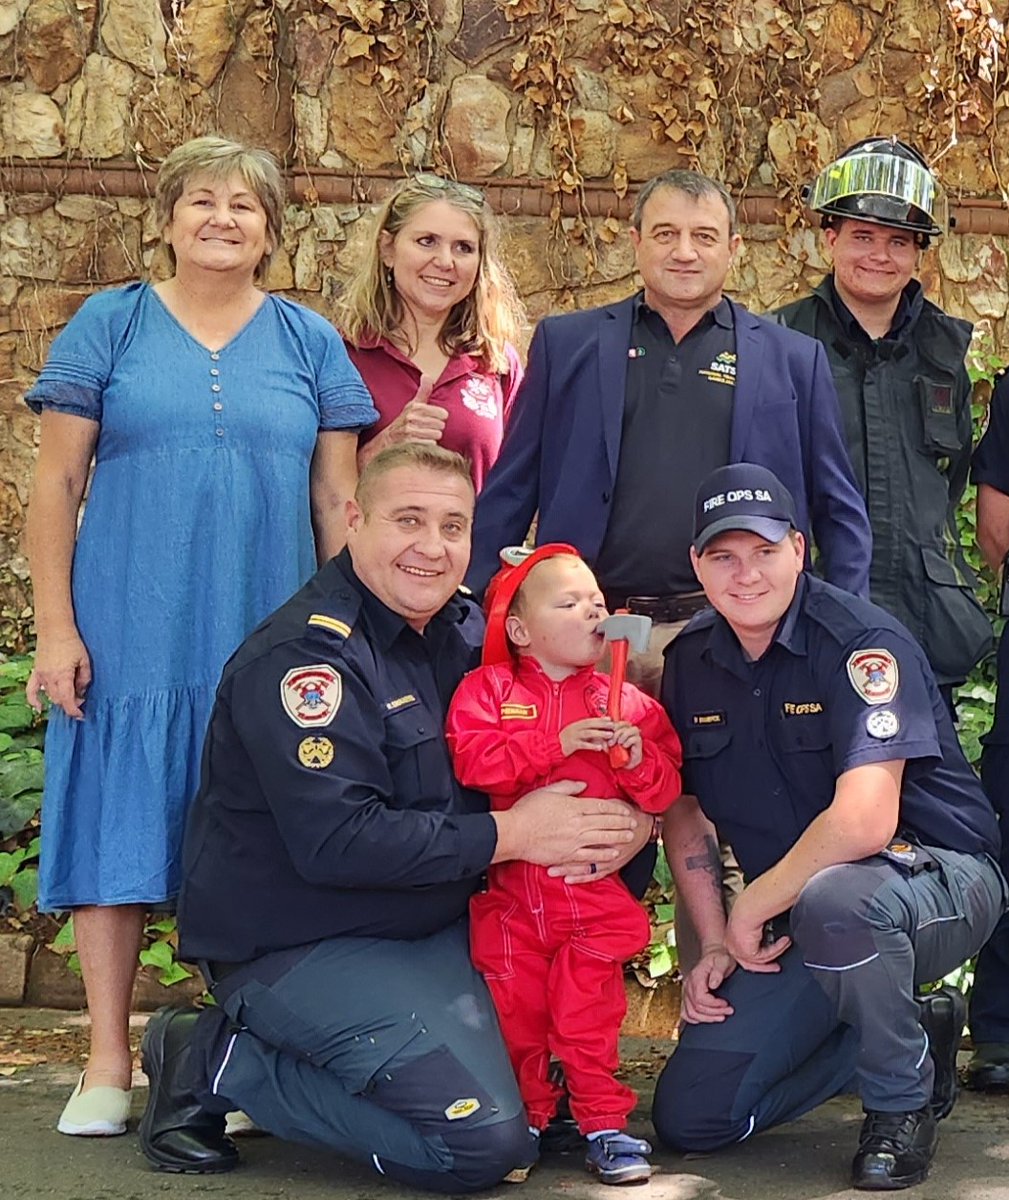 SA Transplant Sports Association, Organ Donor Foundation and Fire Ops SA getting together @FoxwoodHouse with a future Transplant Sports Star, Henu Pienaar, who is awayting a Heart Transplant. https://t.co/we9LIdkUli